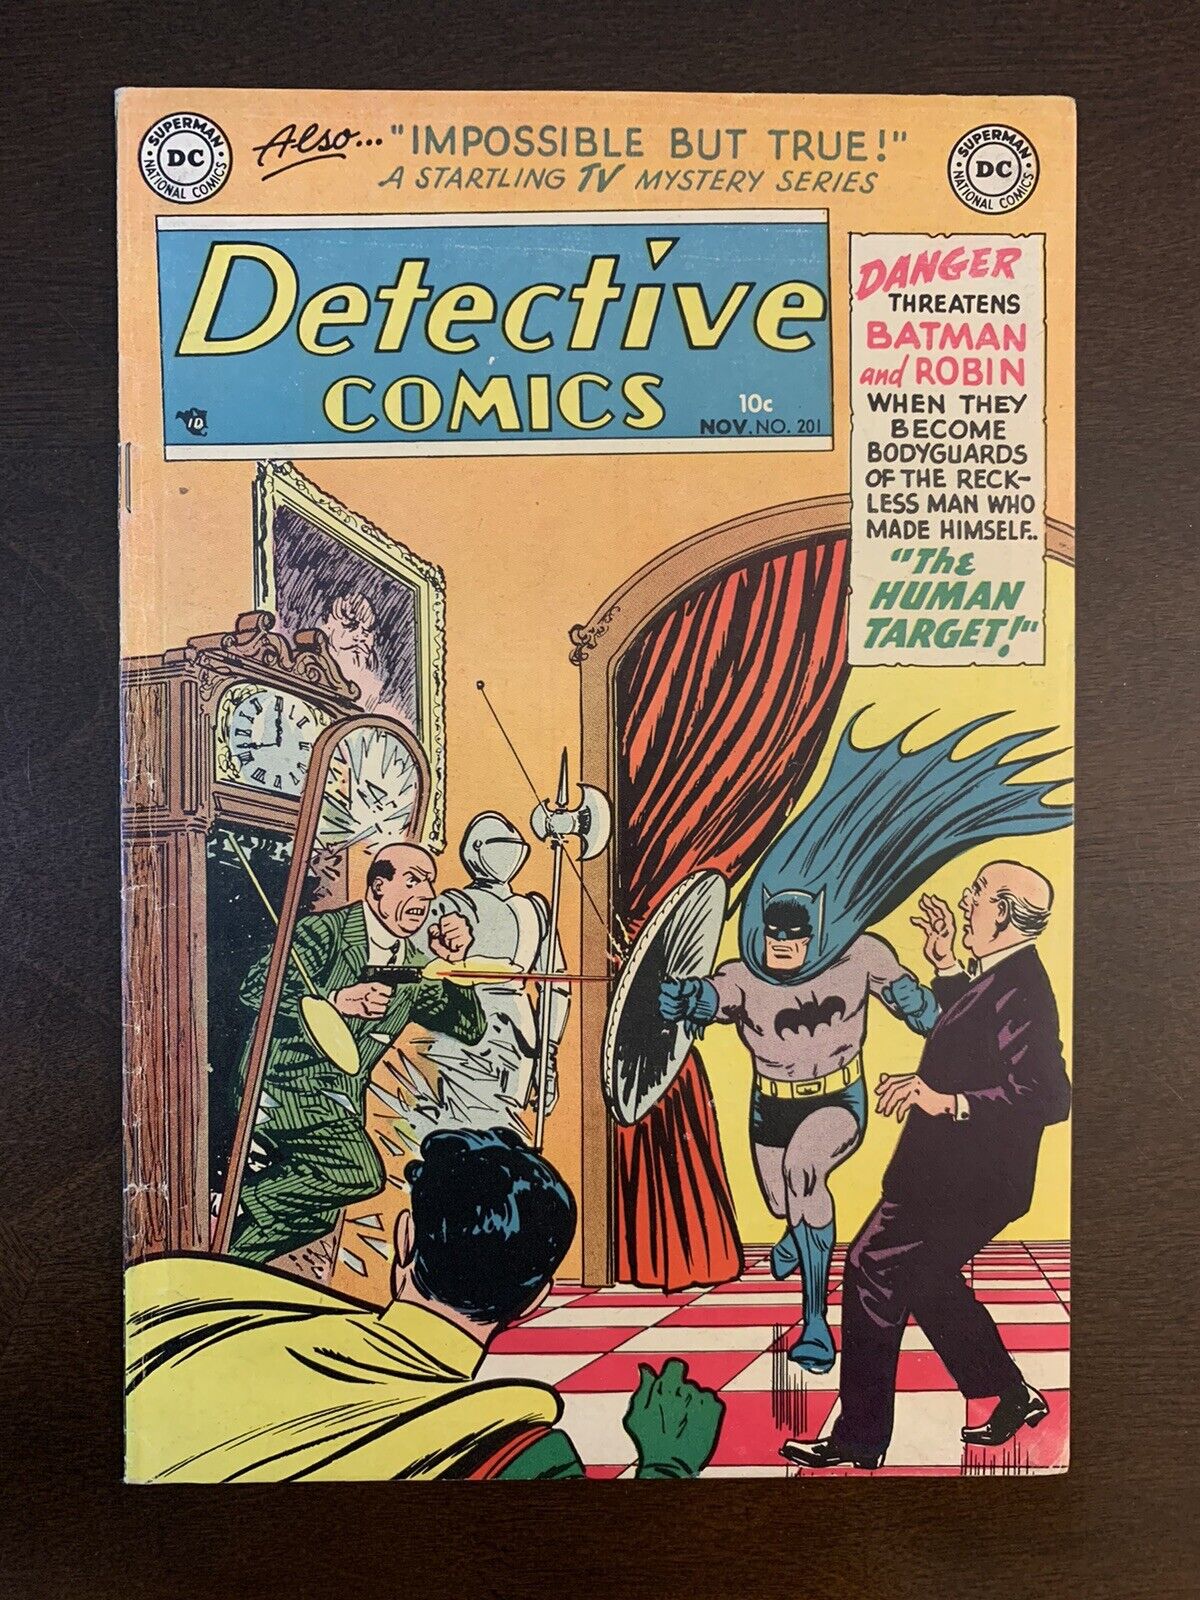 DETECTIVE COMICS #201 4.0-5.0 First Appearance Of The Human Target Golden Age